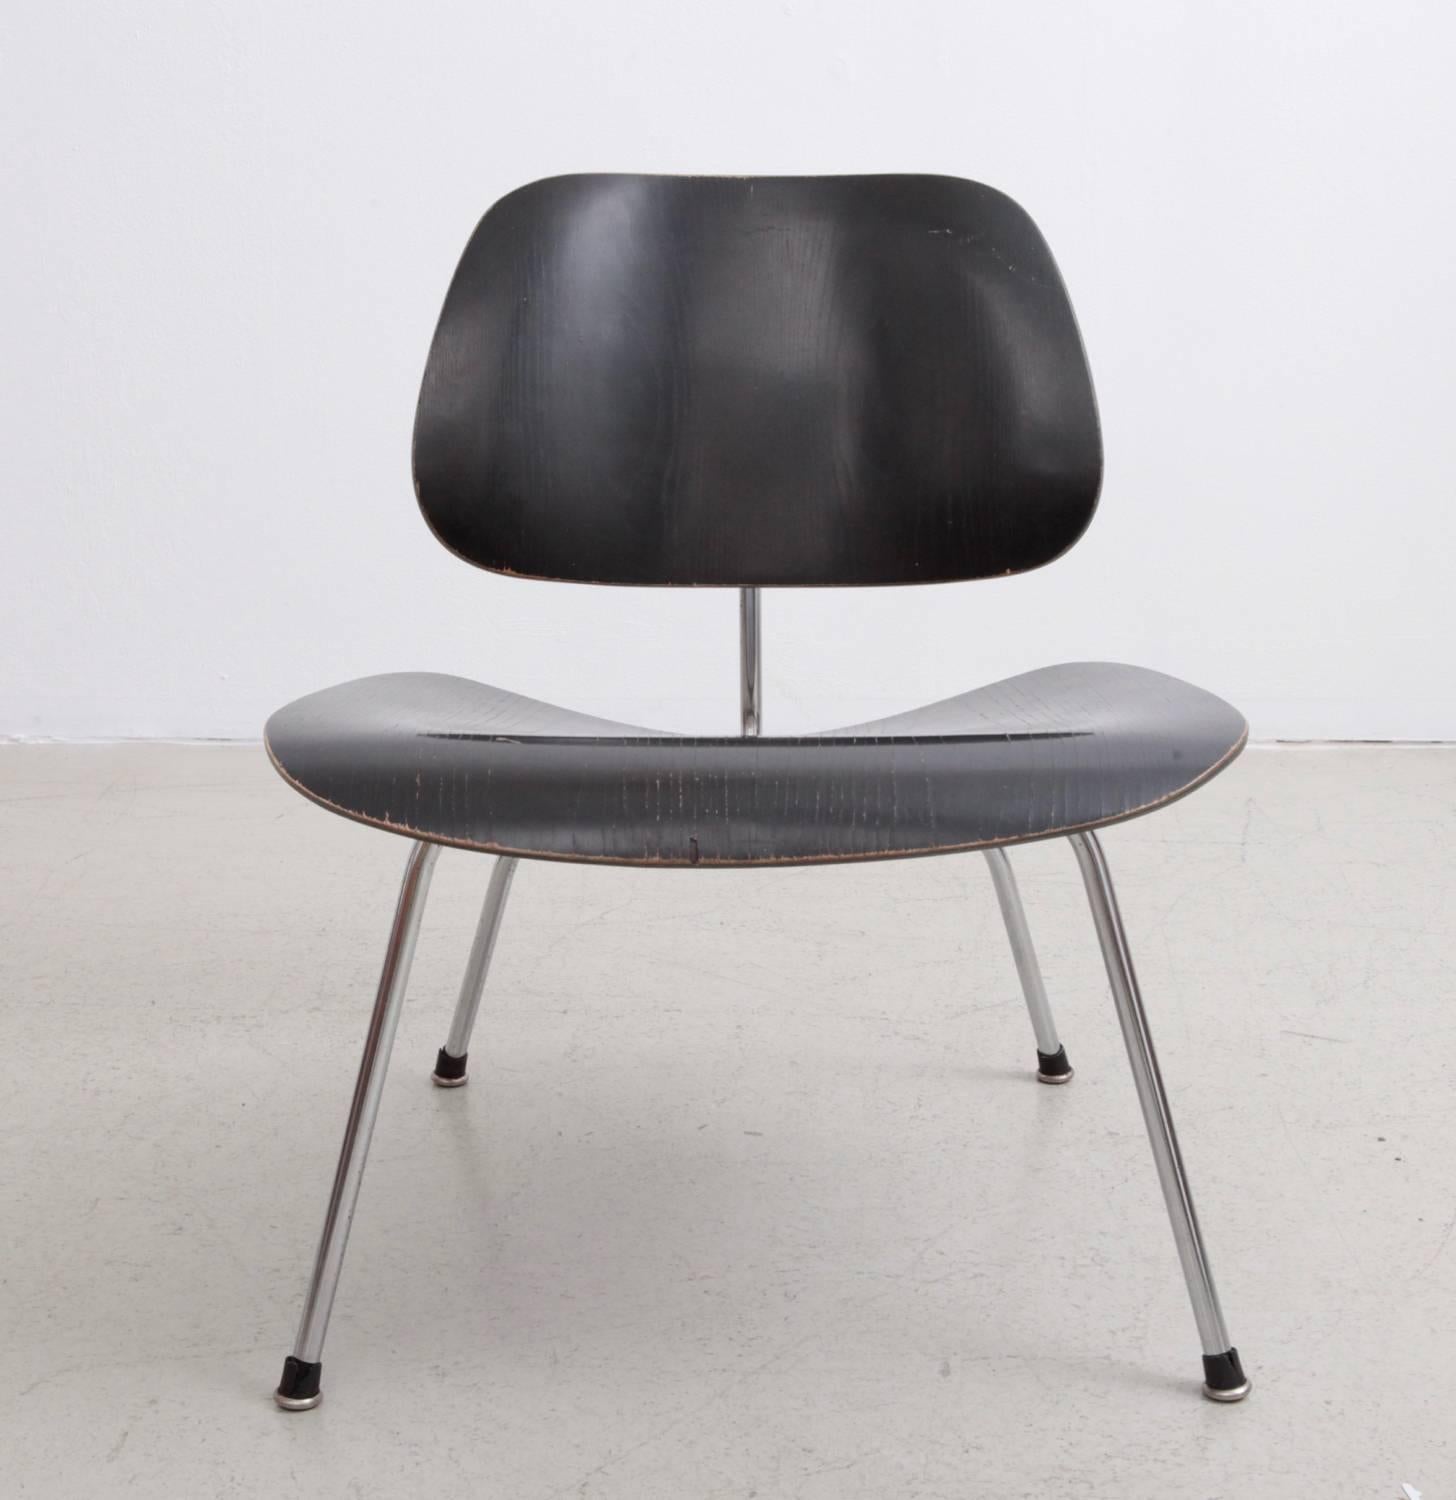 Mid-Century Modern Pair of Early LCM Lounge Chairs by Charles Eames for Herman Miller